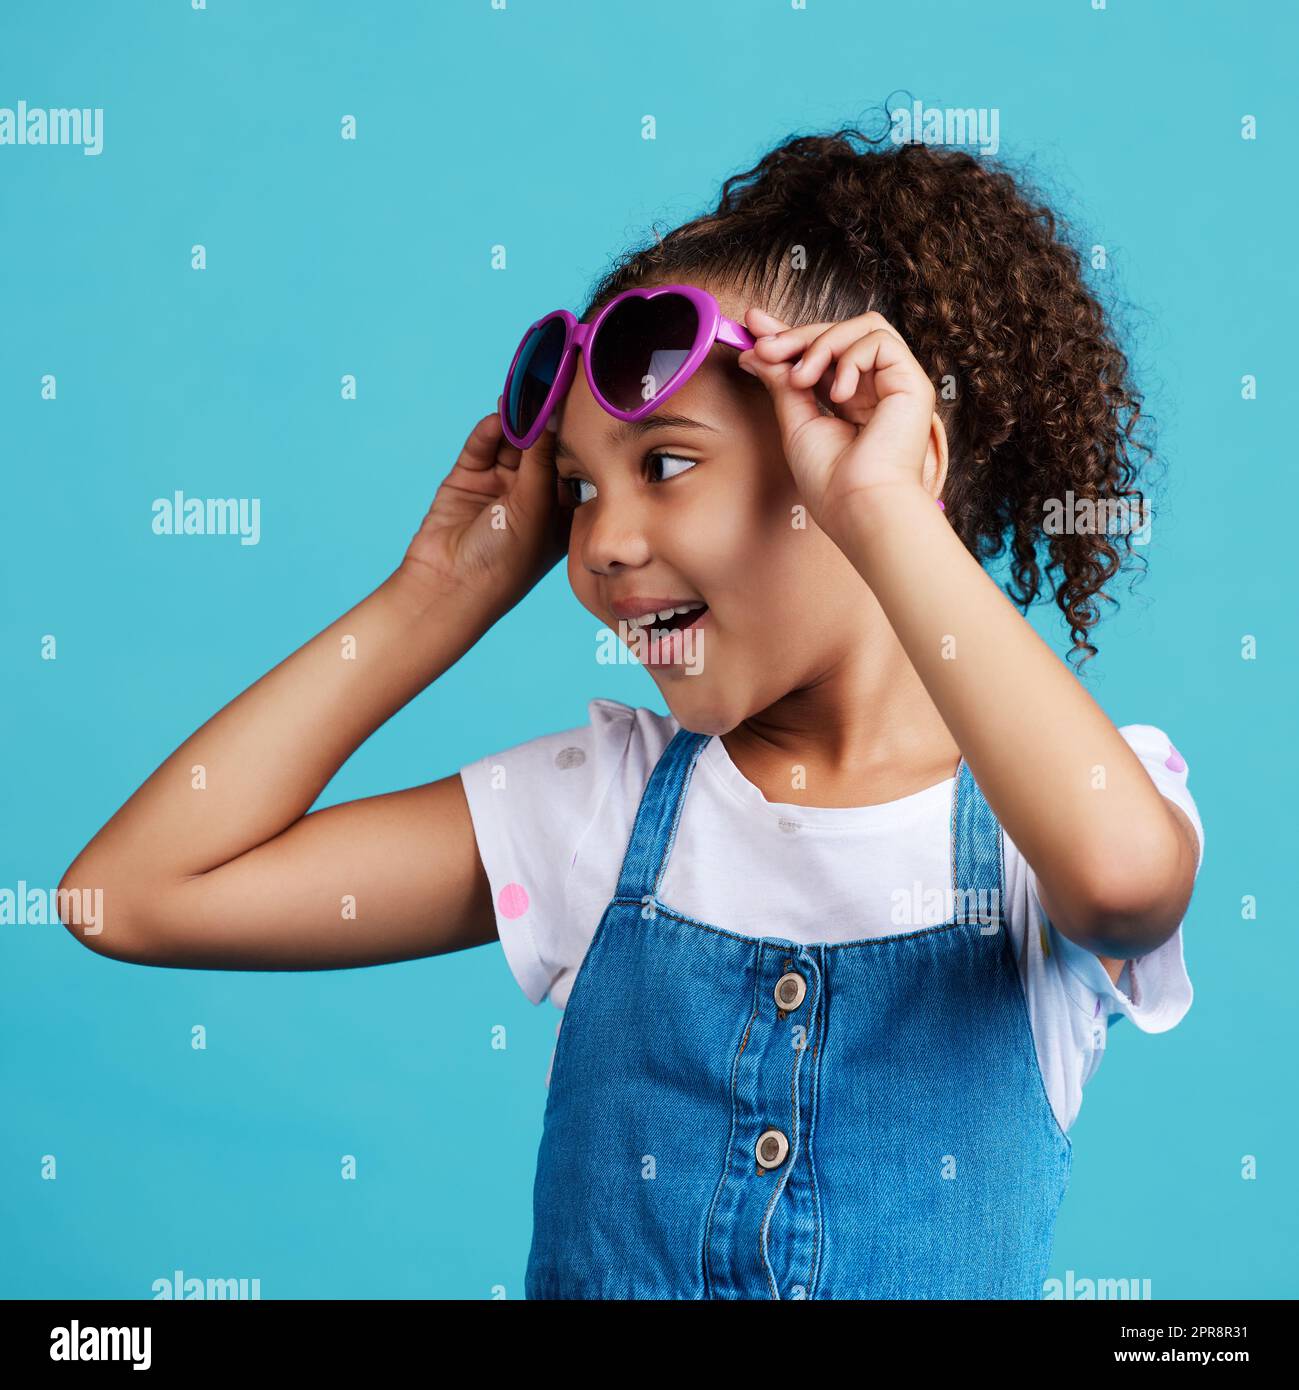 Everyone thinks that Im super adorable. an adorable little girl posing against a blue background. Stock Photo